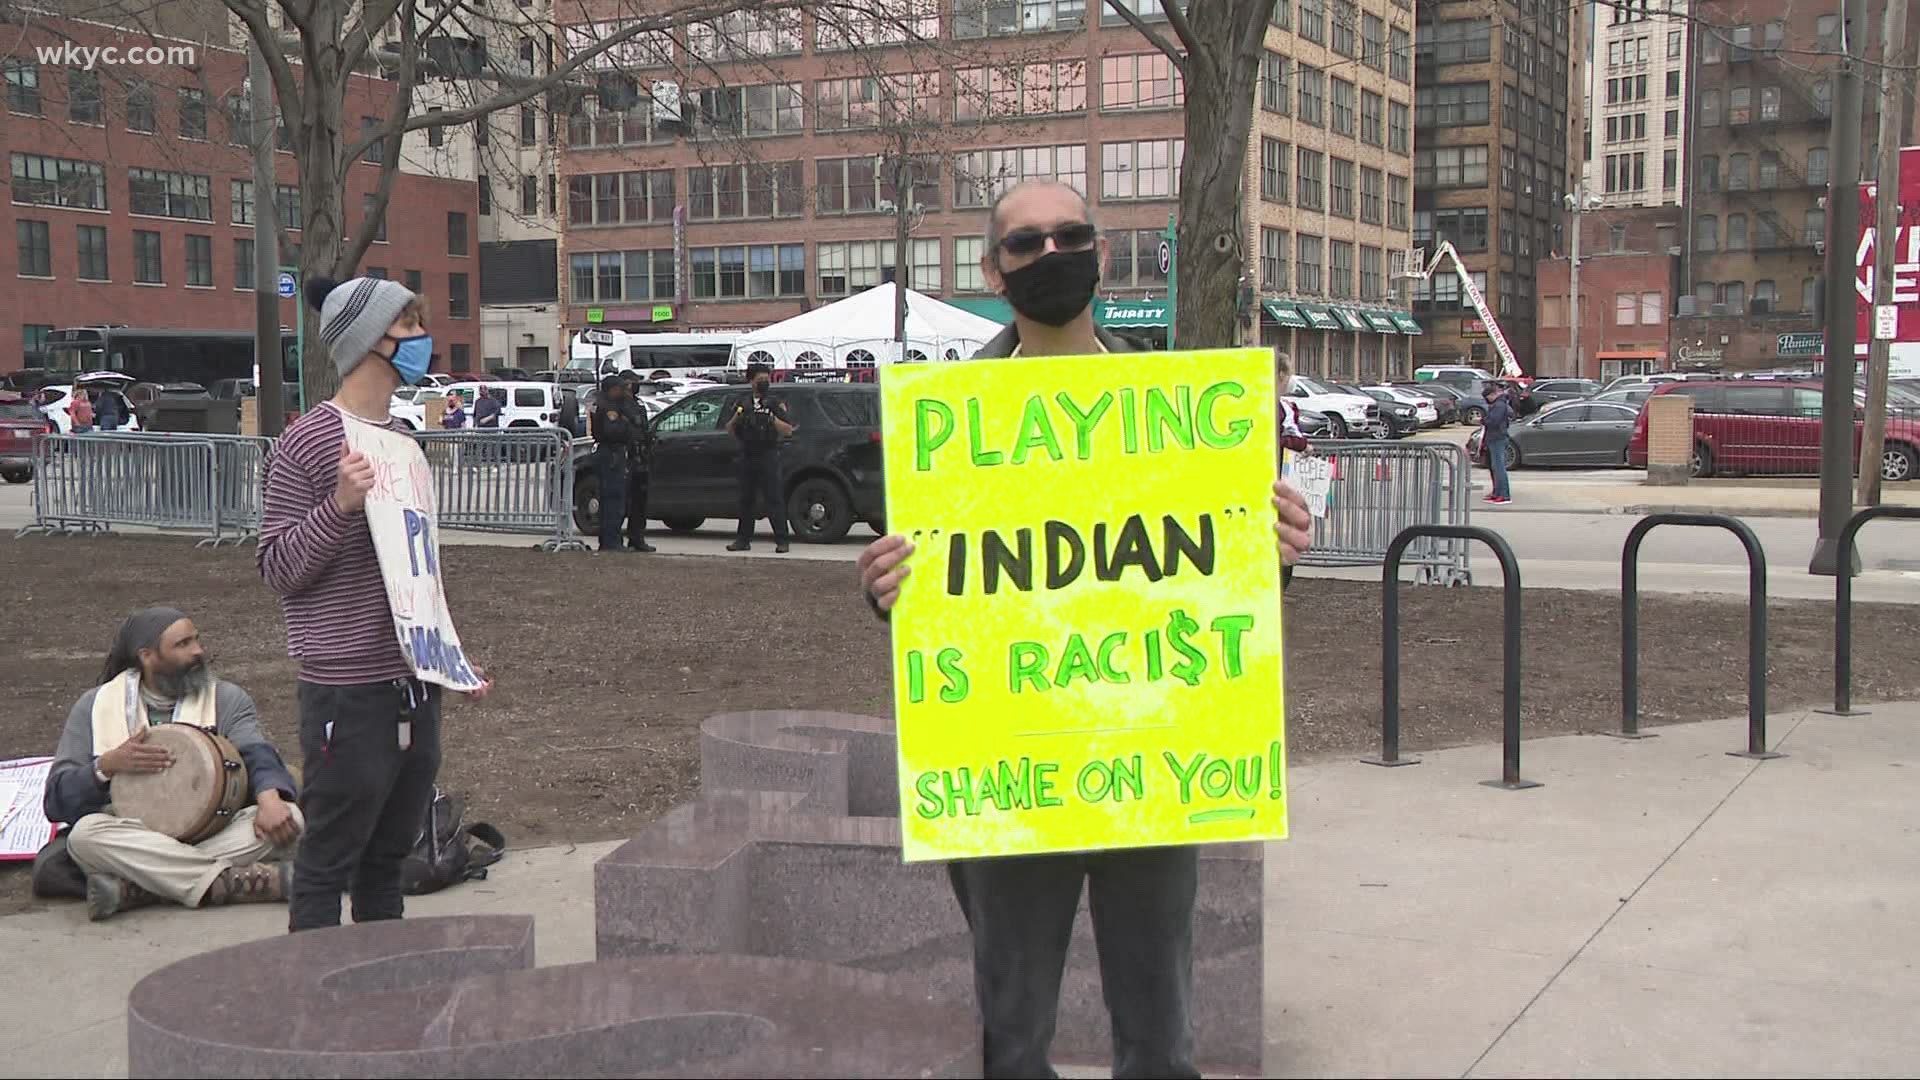 The club announced back in December it will drop "Indians" as soon as next season, but for now, it remains. Local activists say they believe their work isn't done.